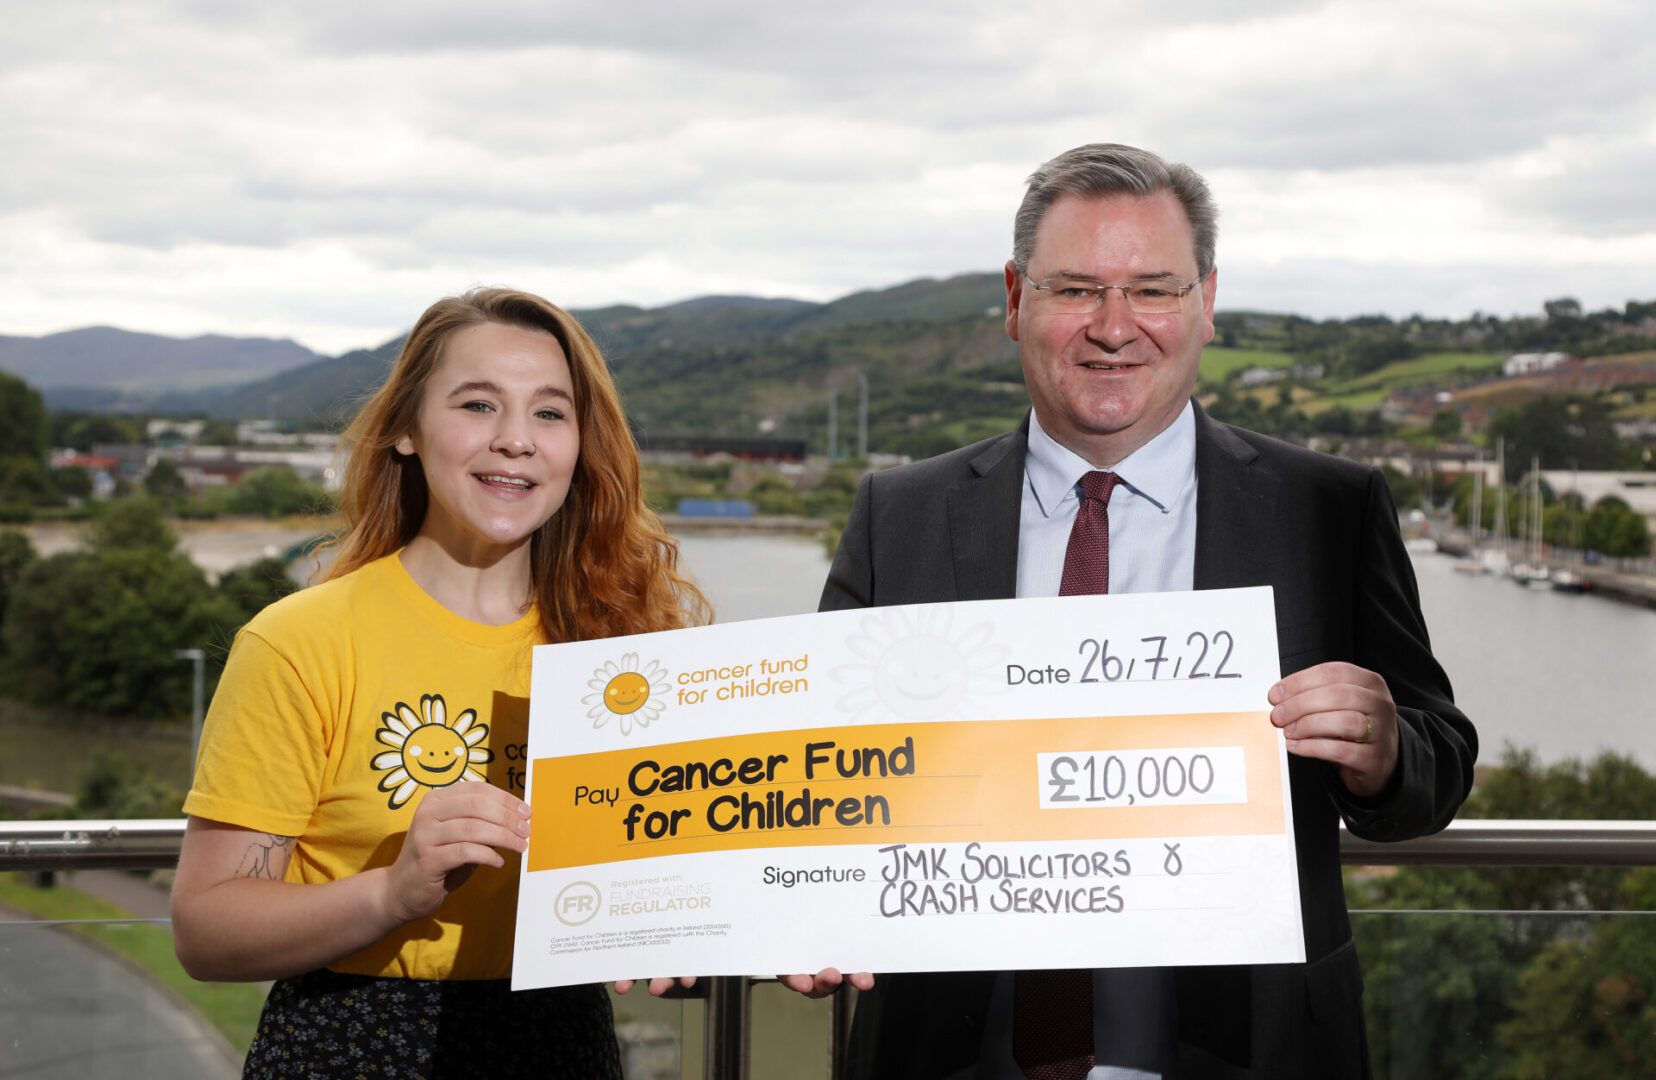 Jonathan presenting £10,000 cheque to Cancer Fund for Children